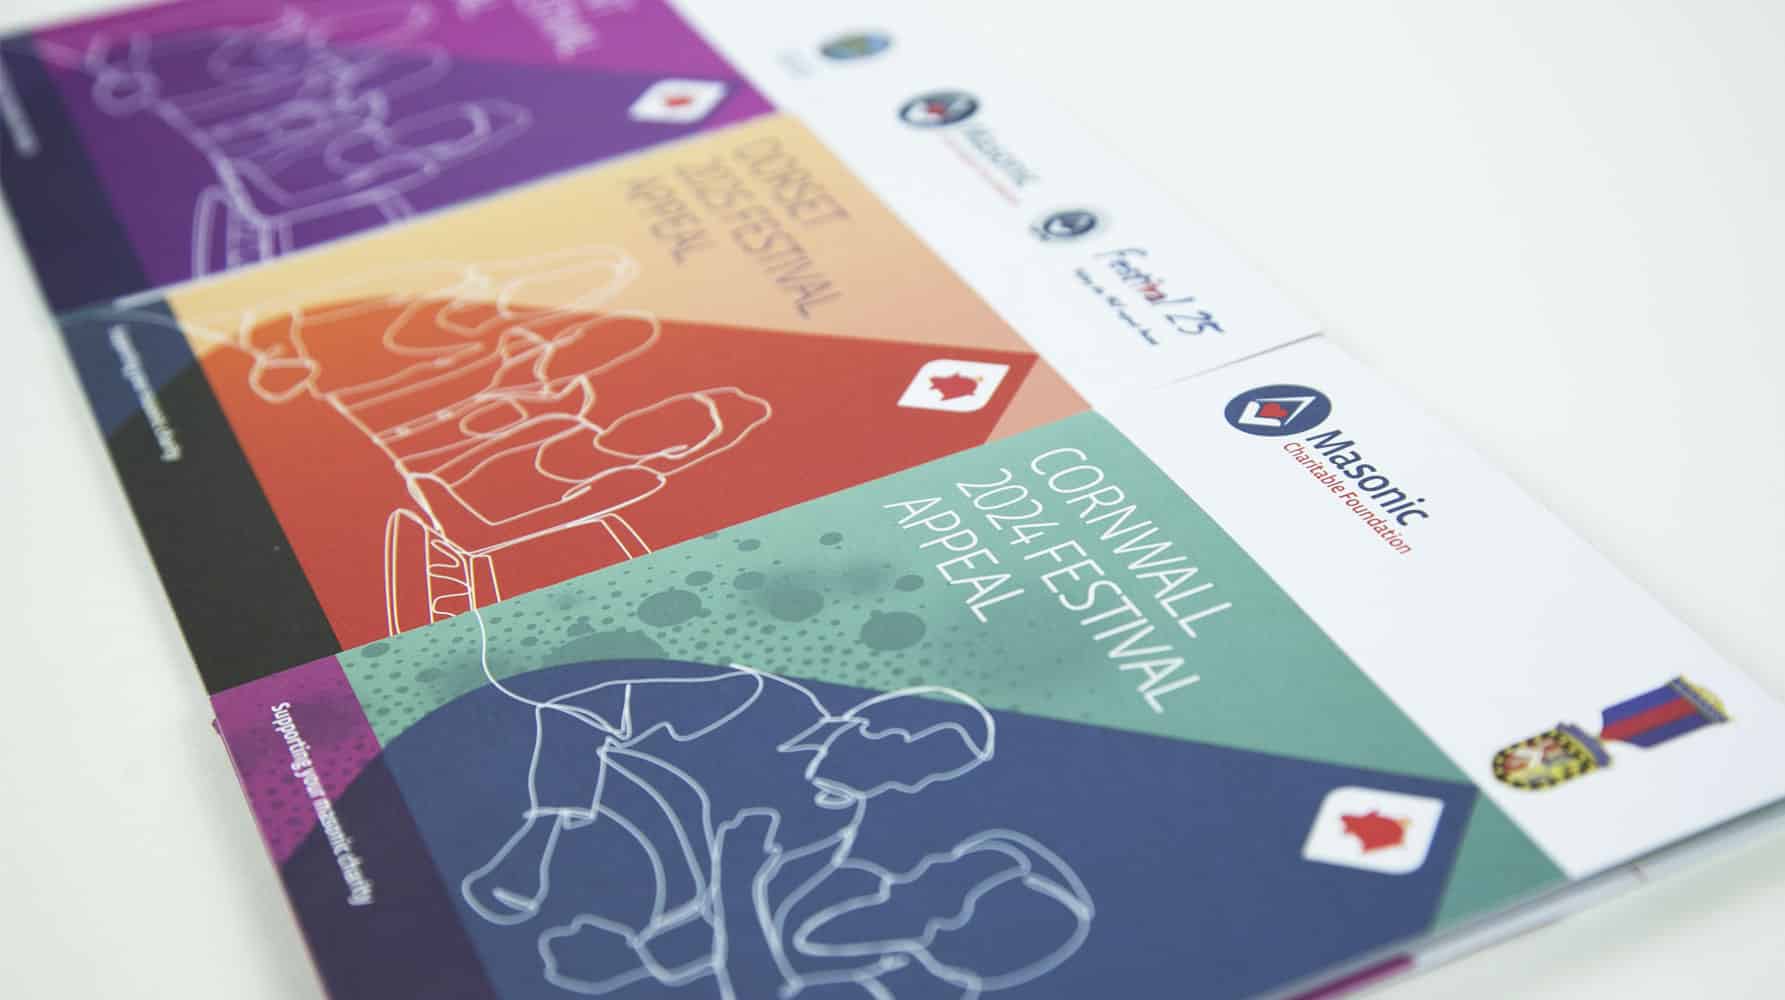 ave design studio london graphic design and website design and development for charities and not-for-profit organisations Masonic Charitable Foundation branding brand identity logo